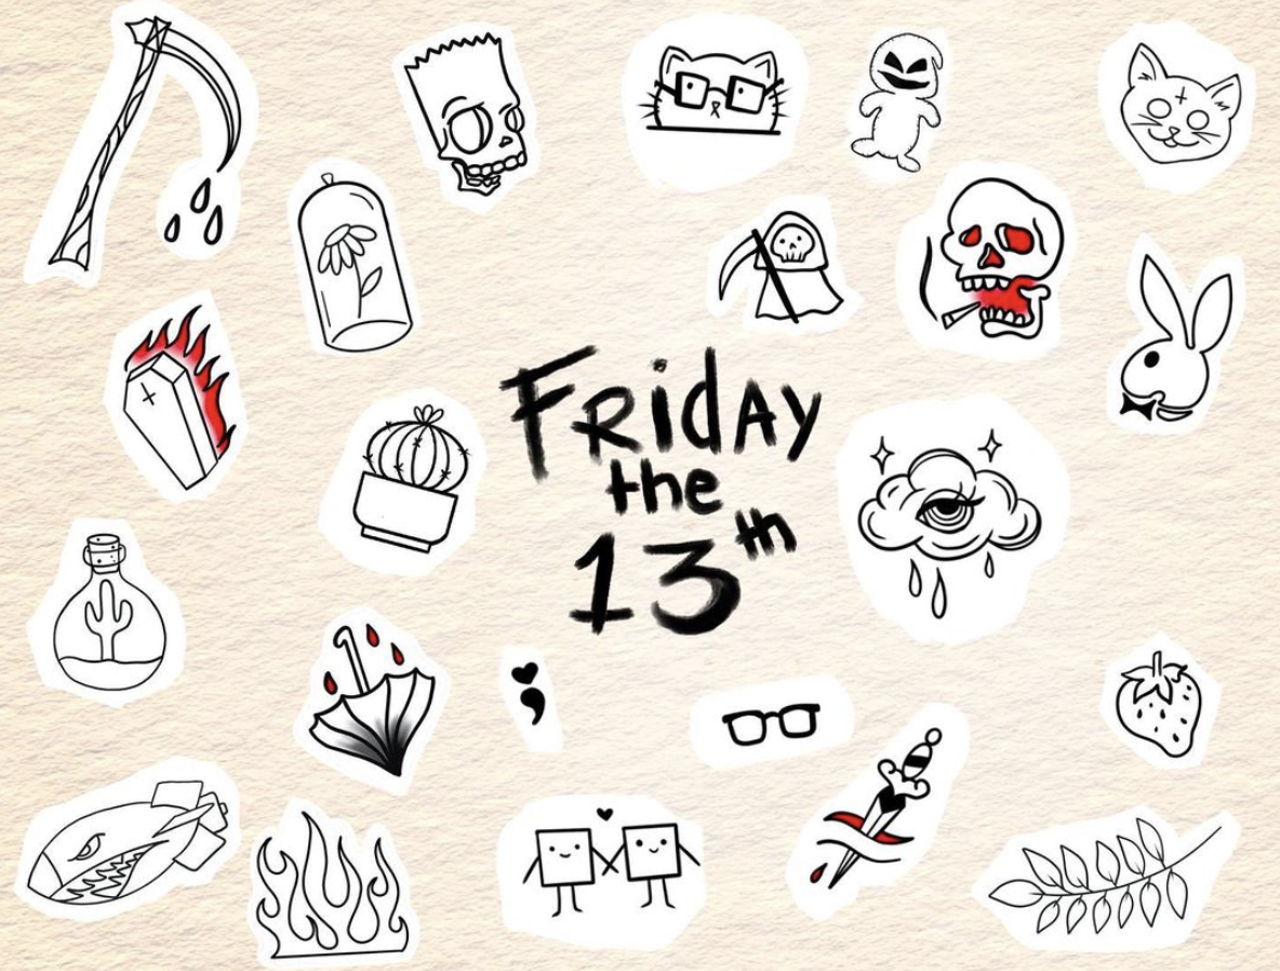 Share 57+ friday the 13th tattoos austin super hot - in.cdgdbentre